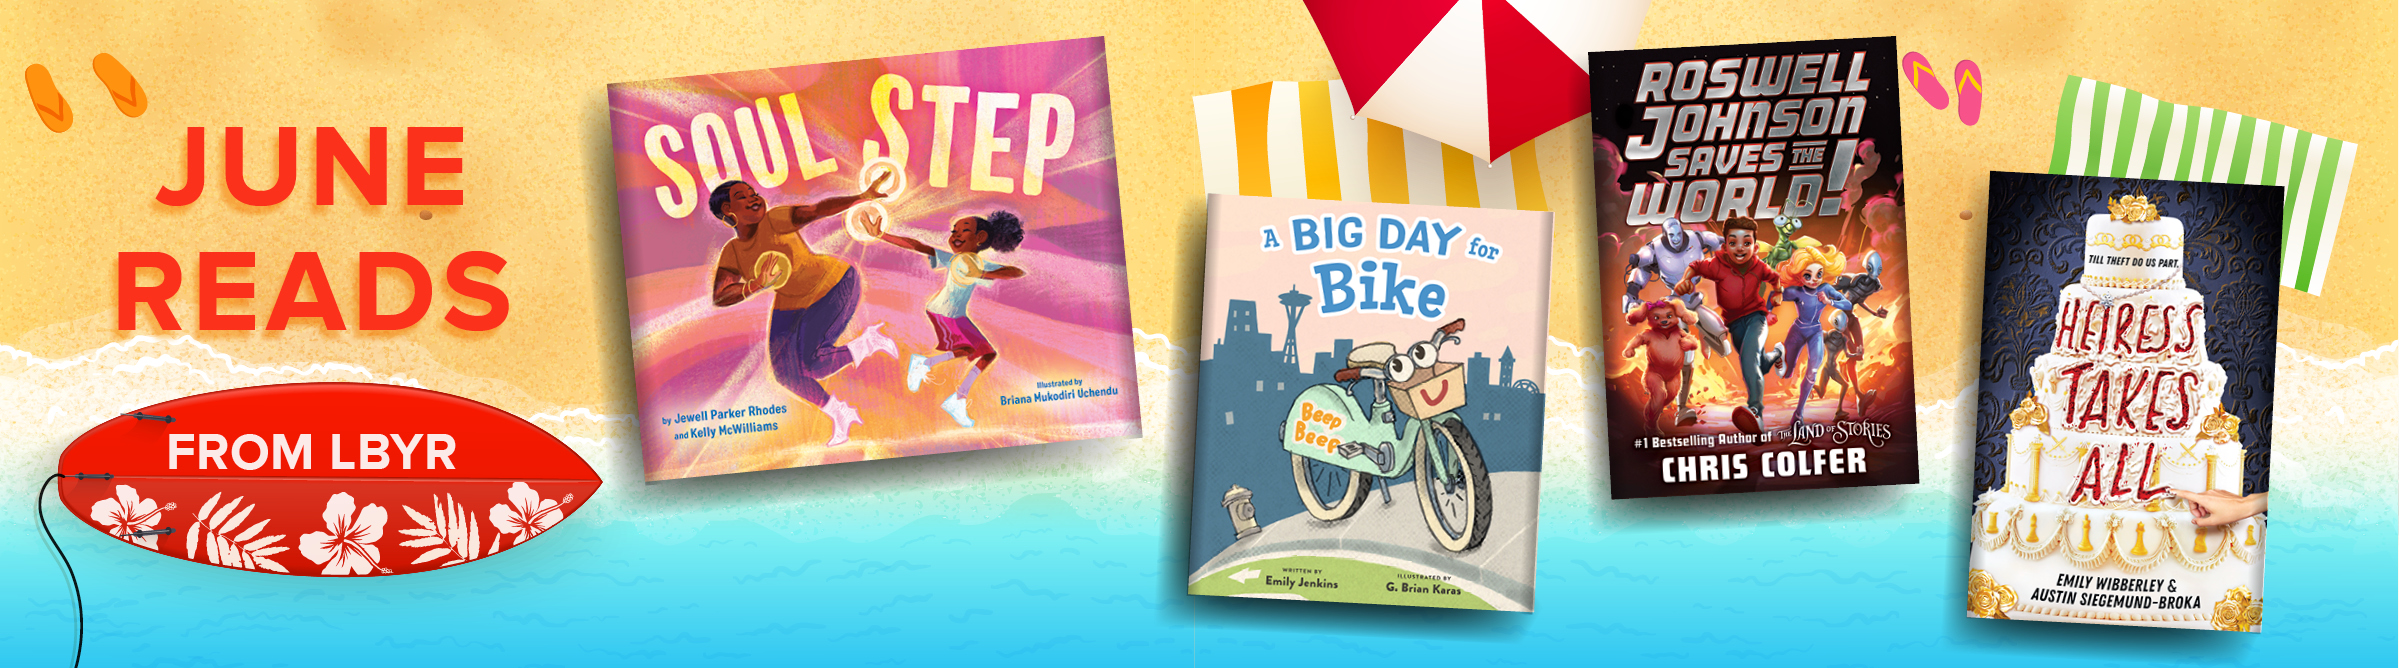 June Reads from LBYR with book covers of 'Soul Step', 'A Big Day for Bike', 'Rosewell Johnson Saves the World!', and 'Heiress Takes All'.